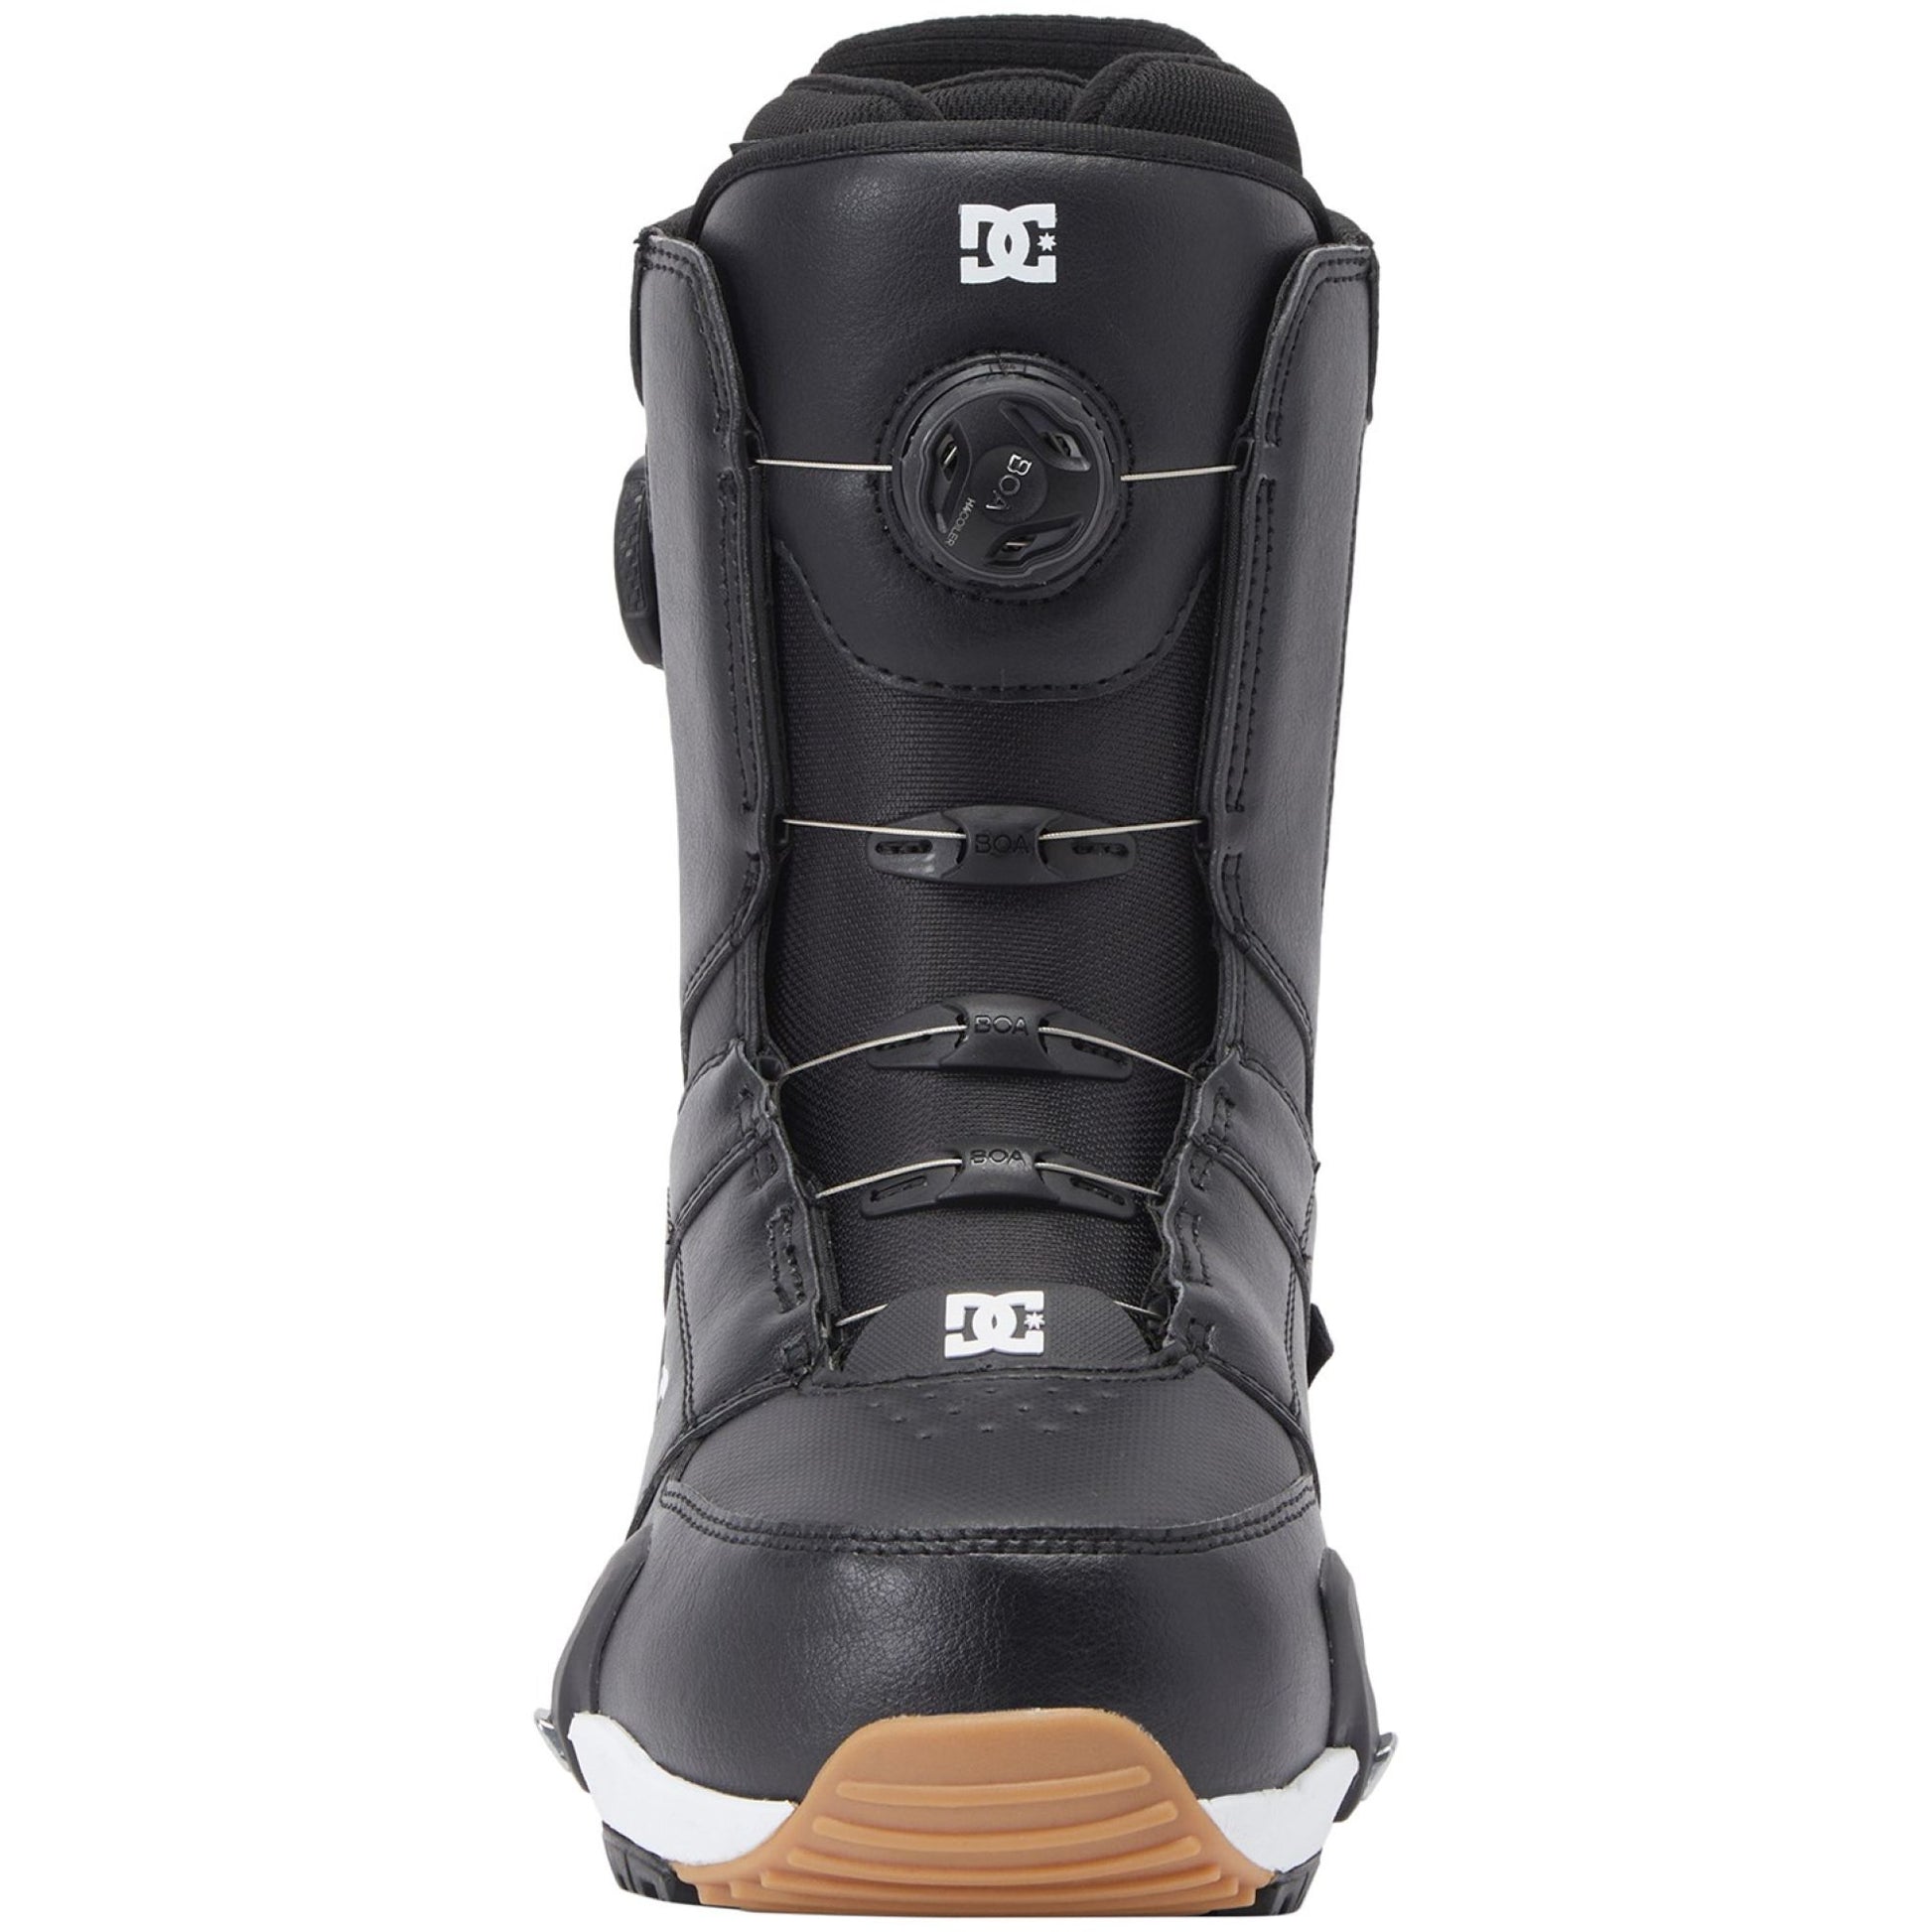 Control Snowboard – Step Boots On BOA DC